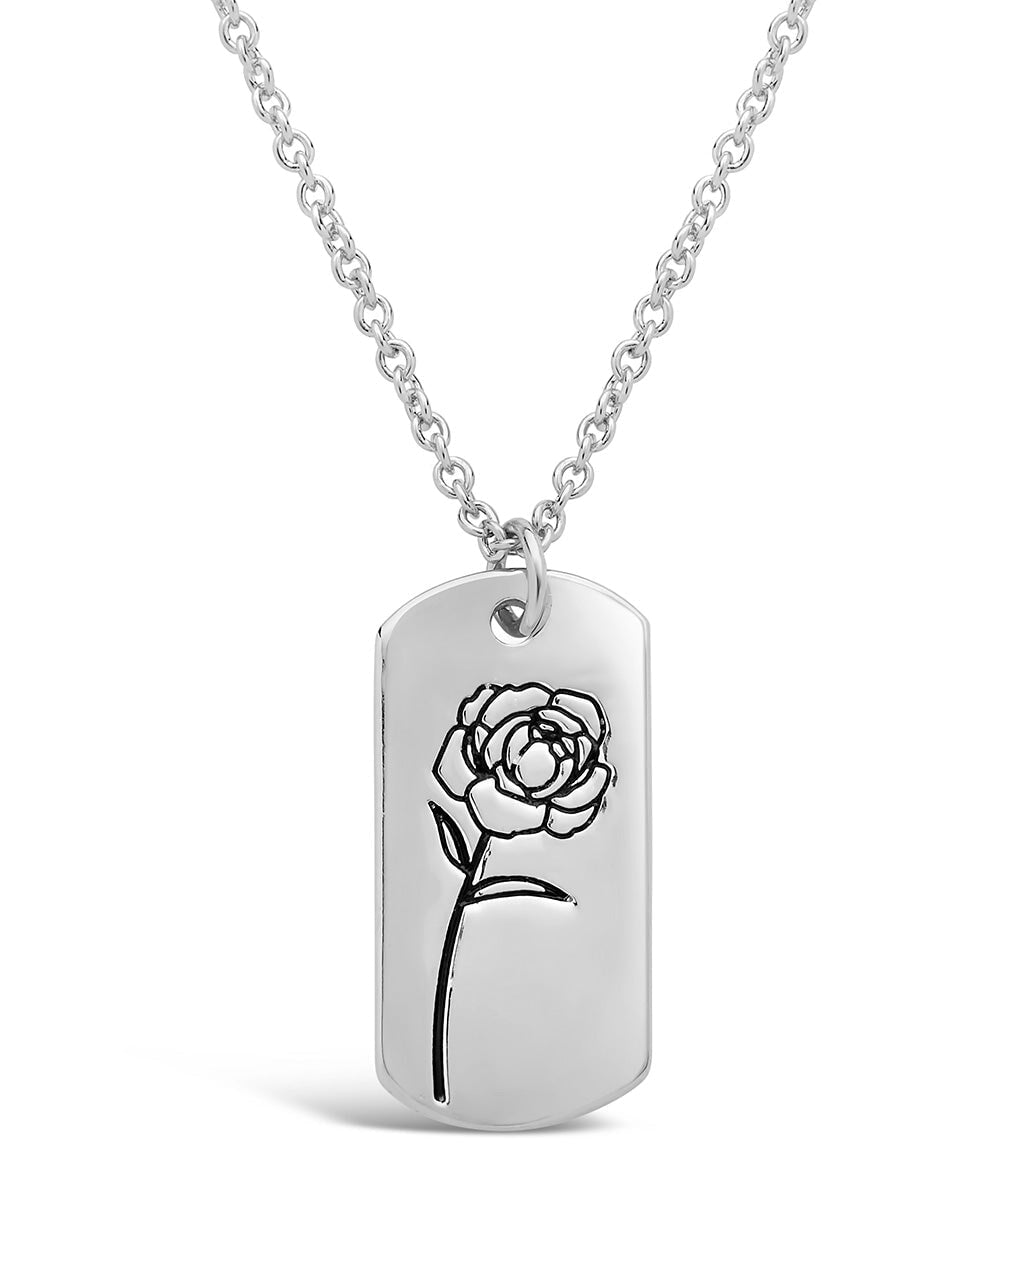 Birth Flower Pendant Necklace Sterling Forever Silver September / Peony 